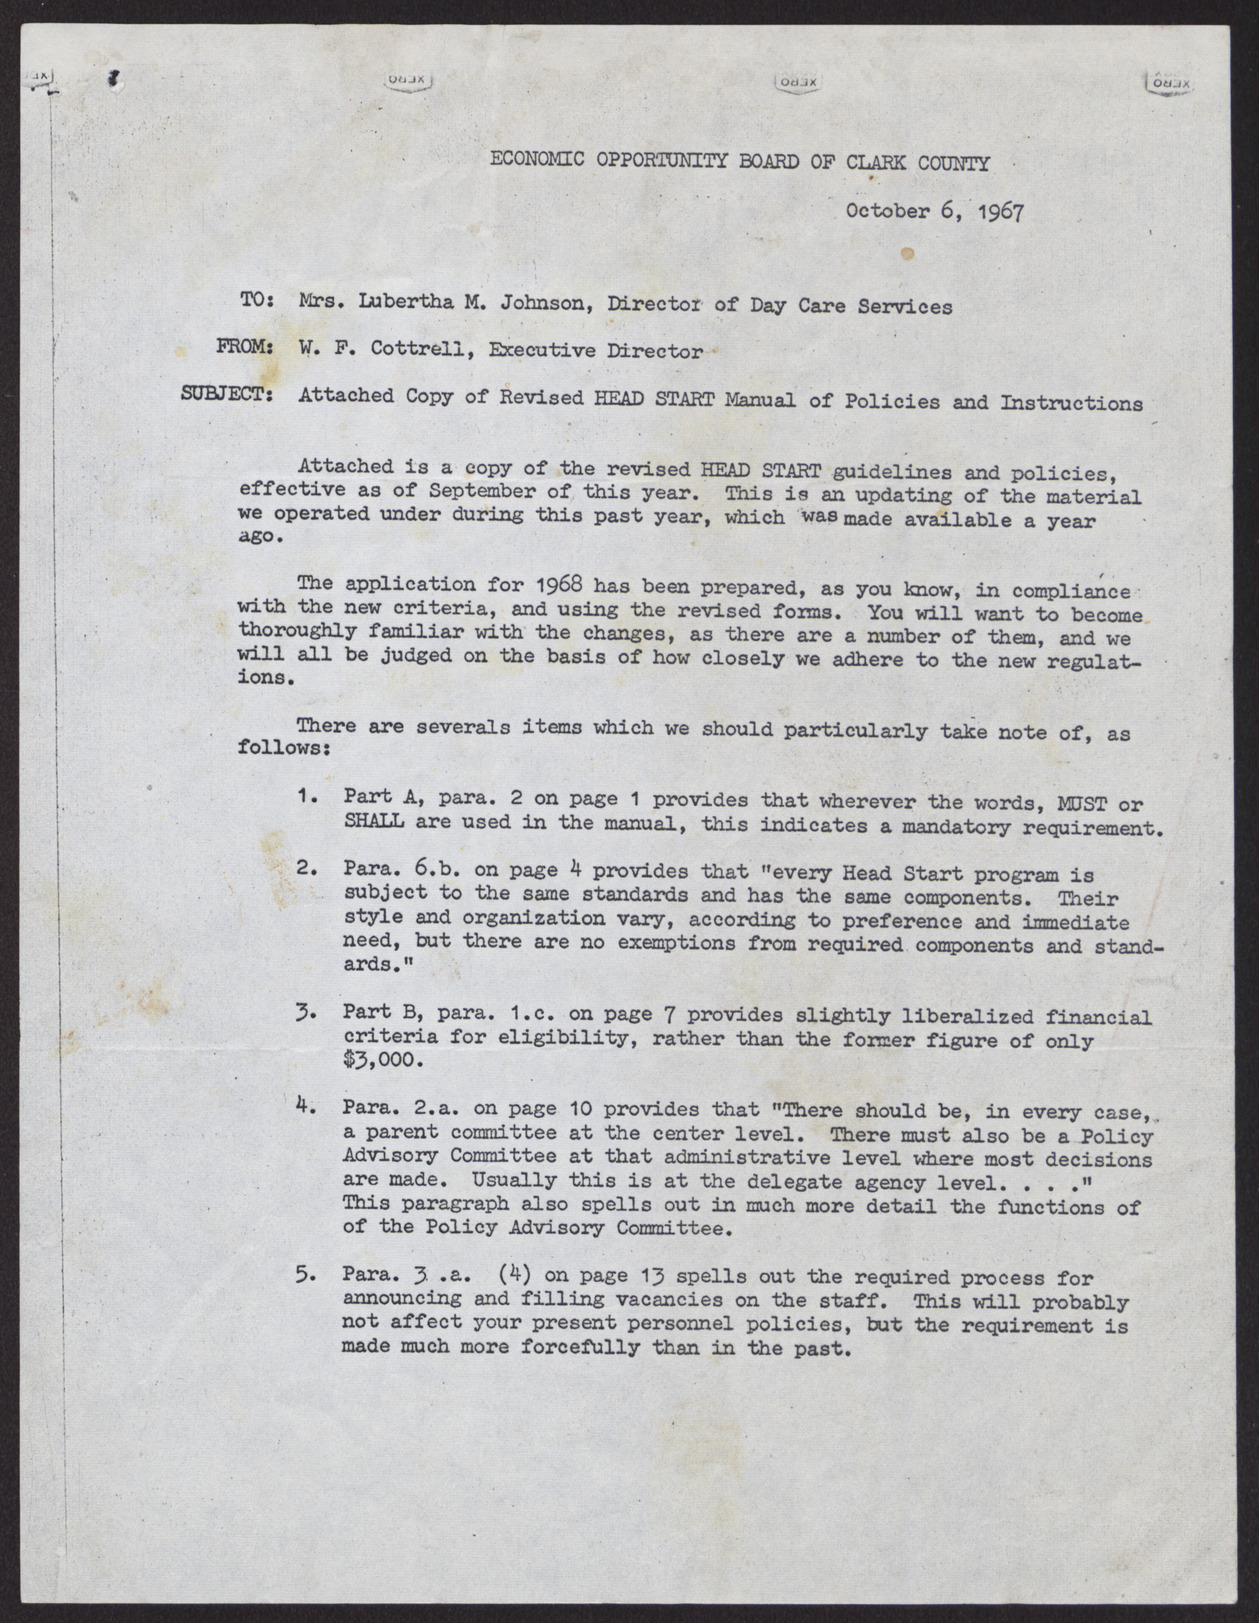 Letter to Mrs. Lubertha M. Johnson from W. F. Cottrell (2 pages), October 6, 1967